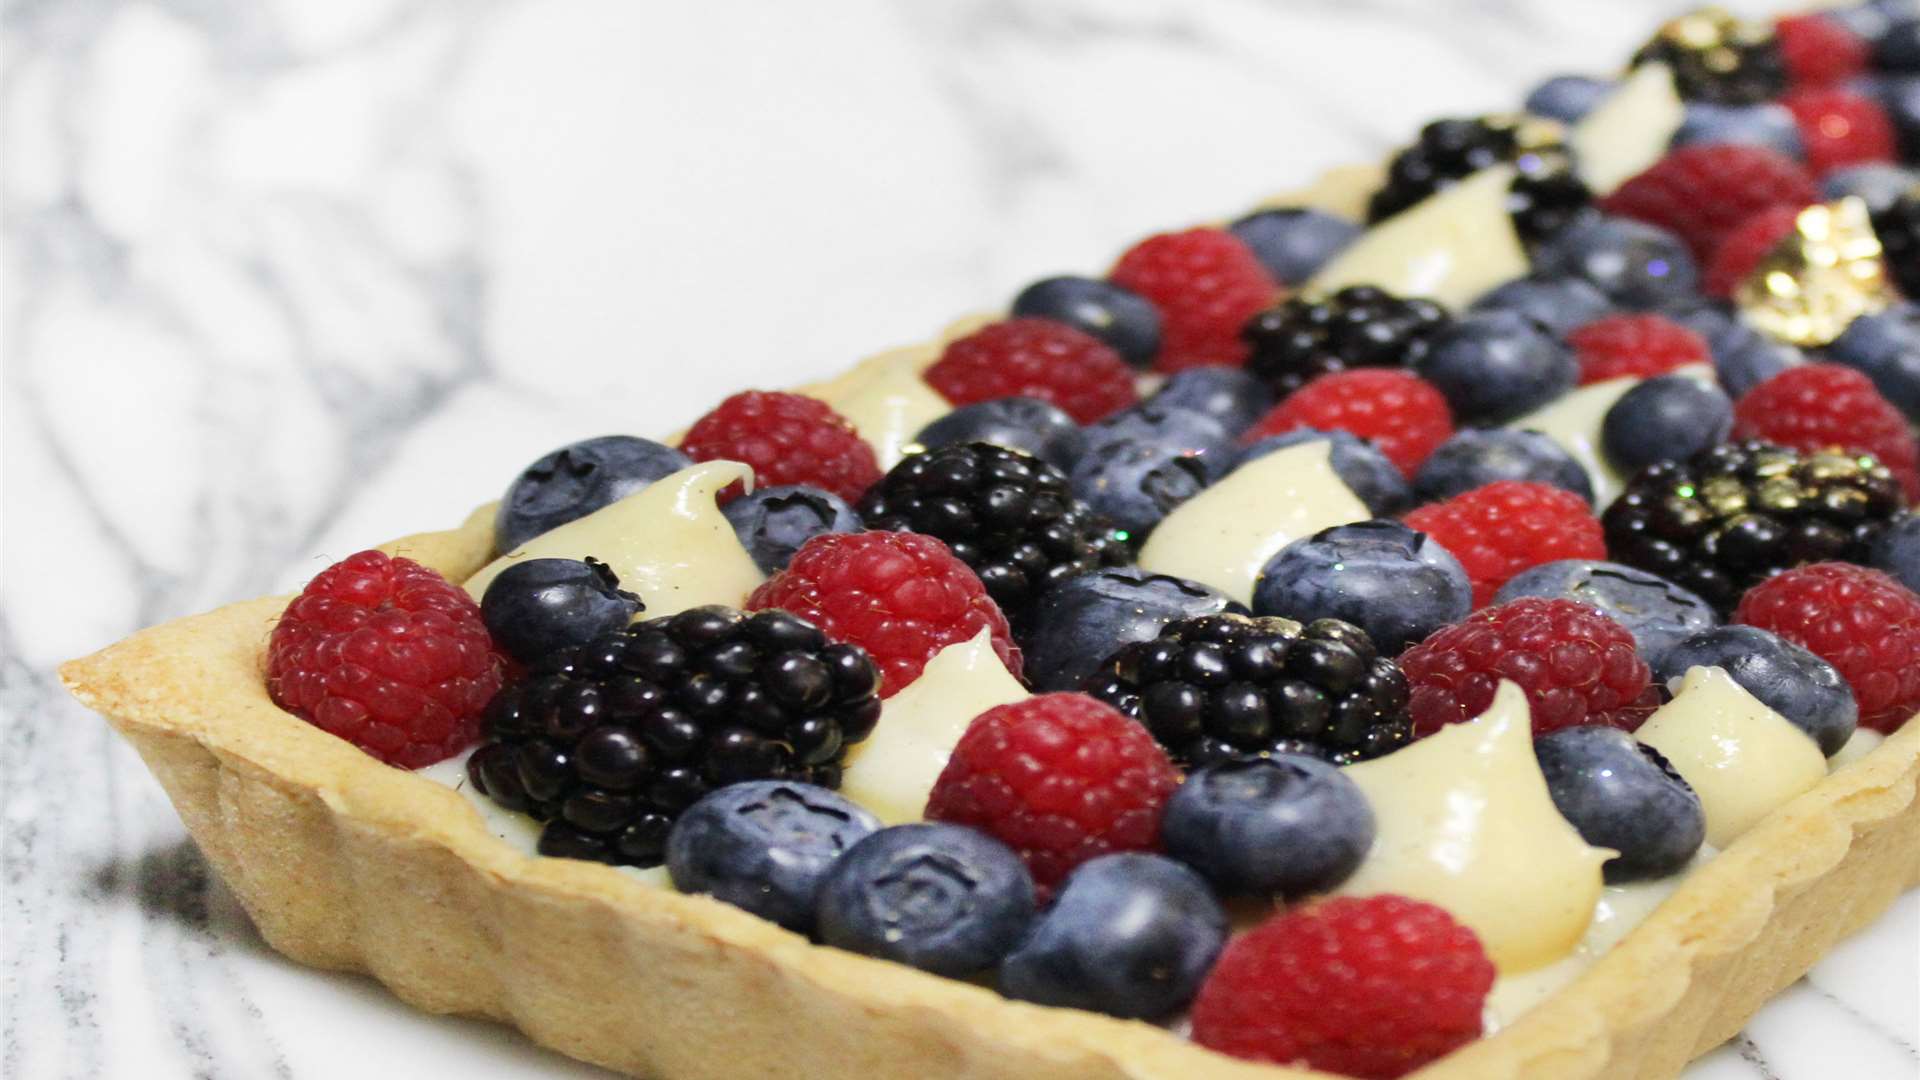 The creme patiserie and fresh fruit tart